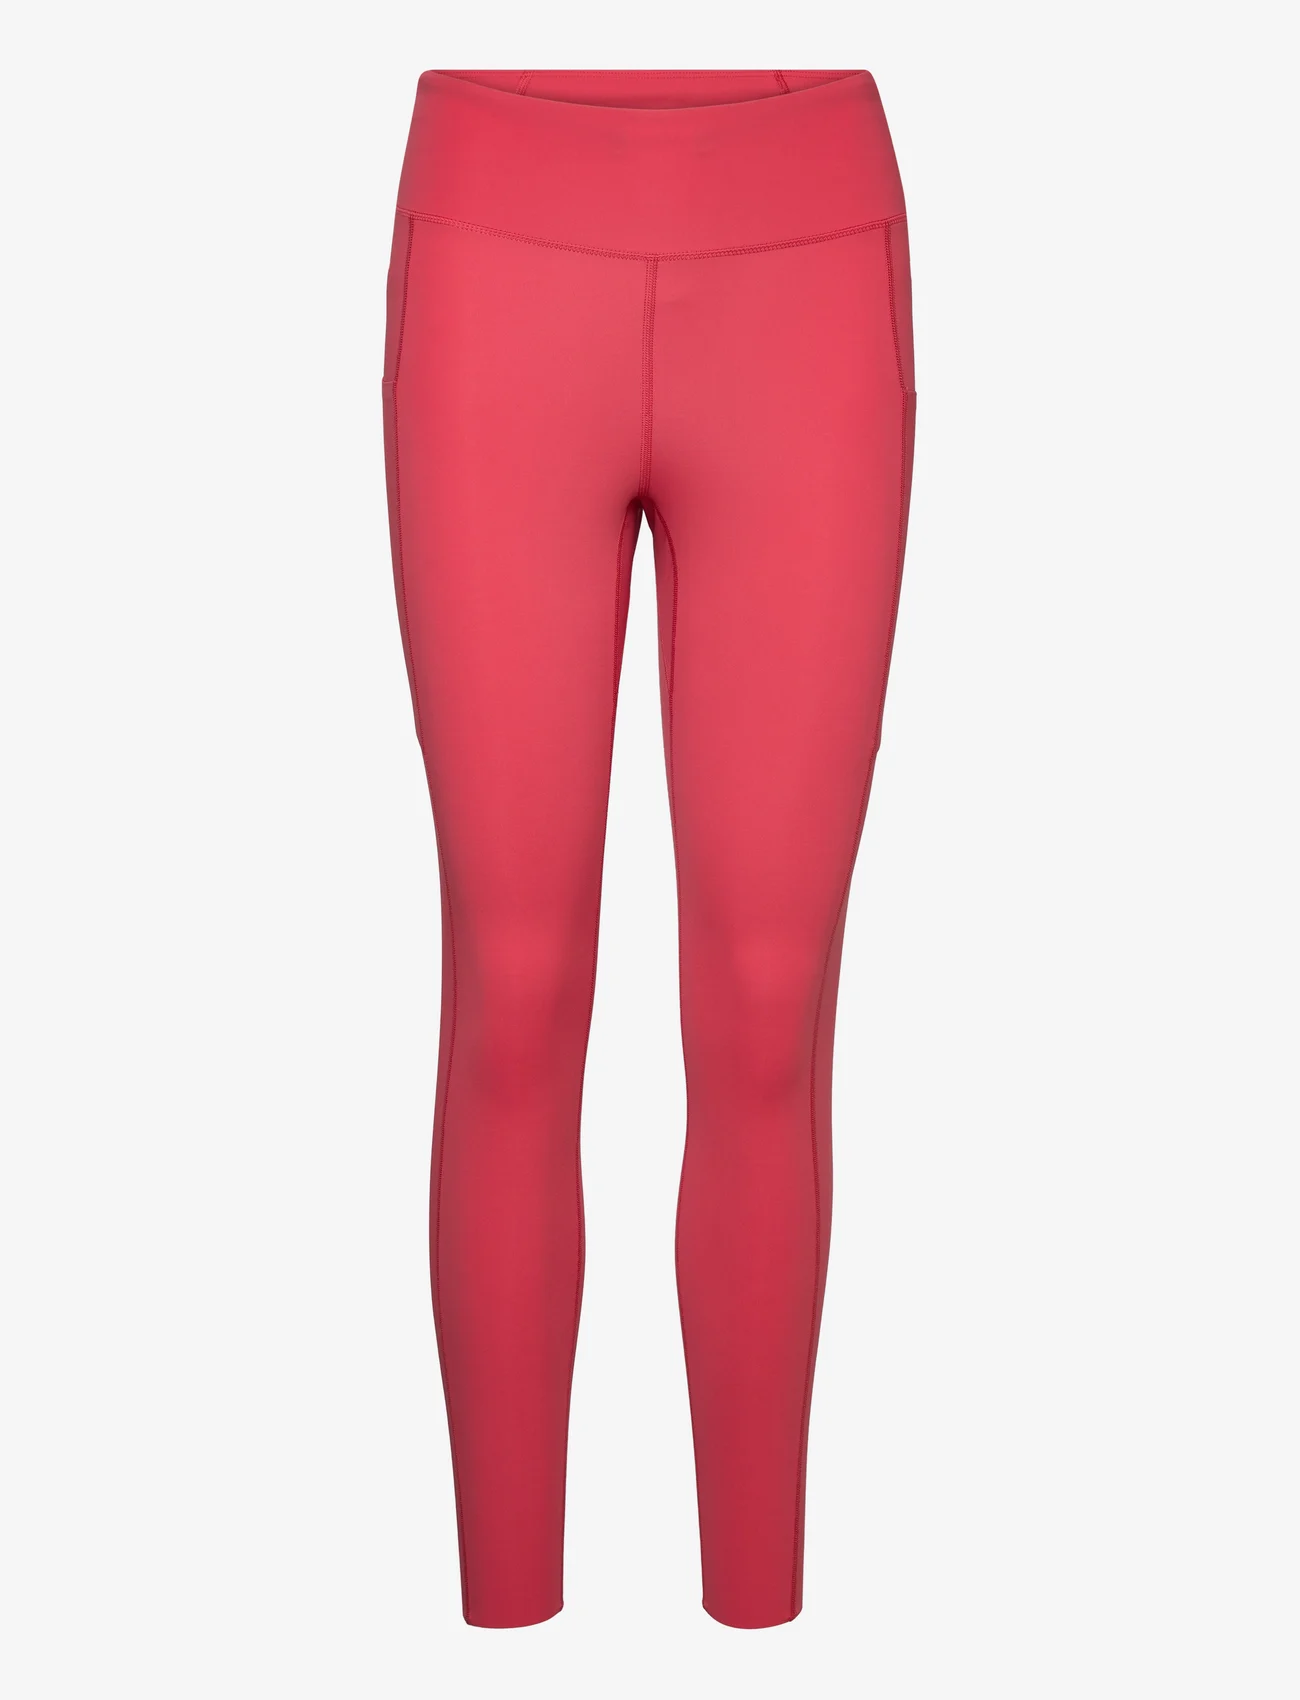 Peak Performance - W Power Tights-SOFTER RED - running & training tights - softer red - 0